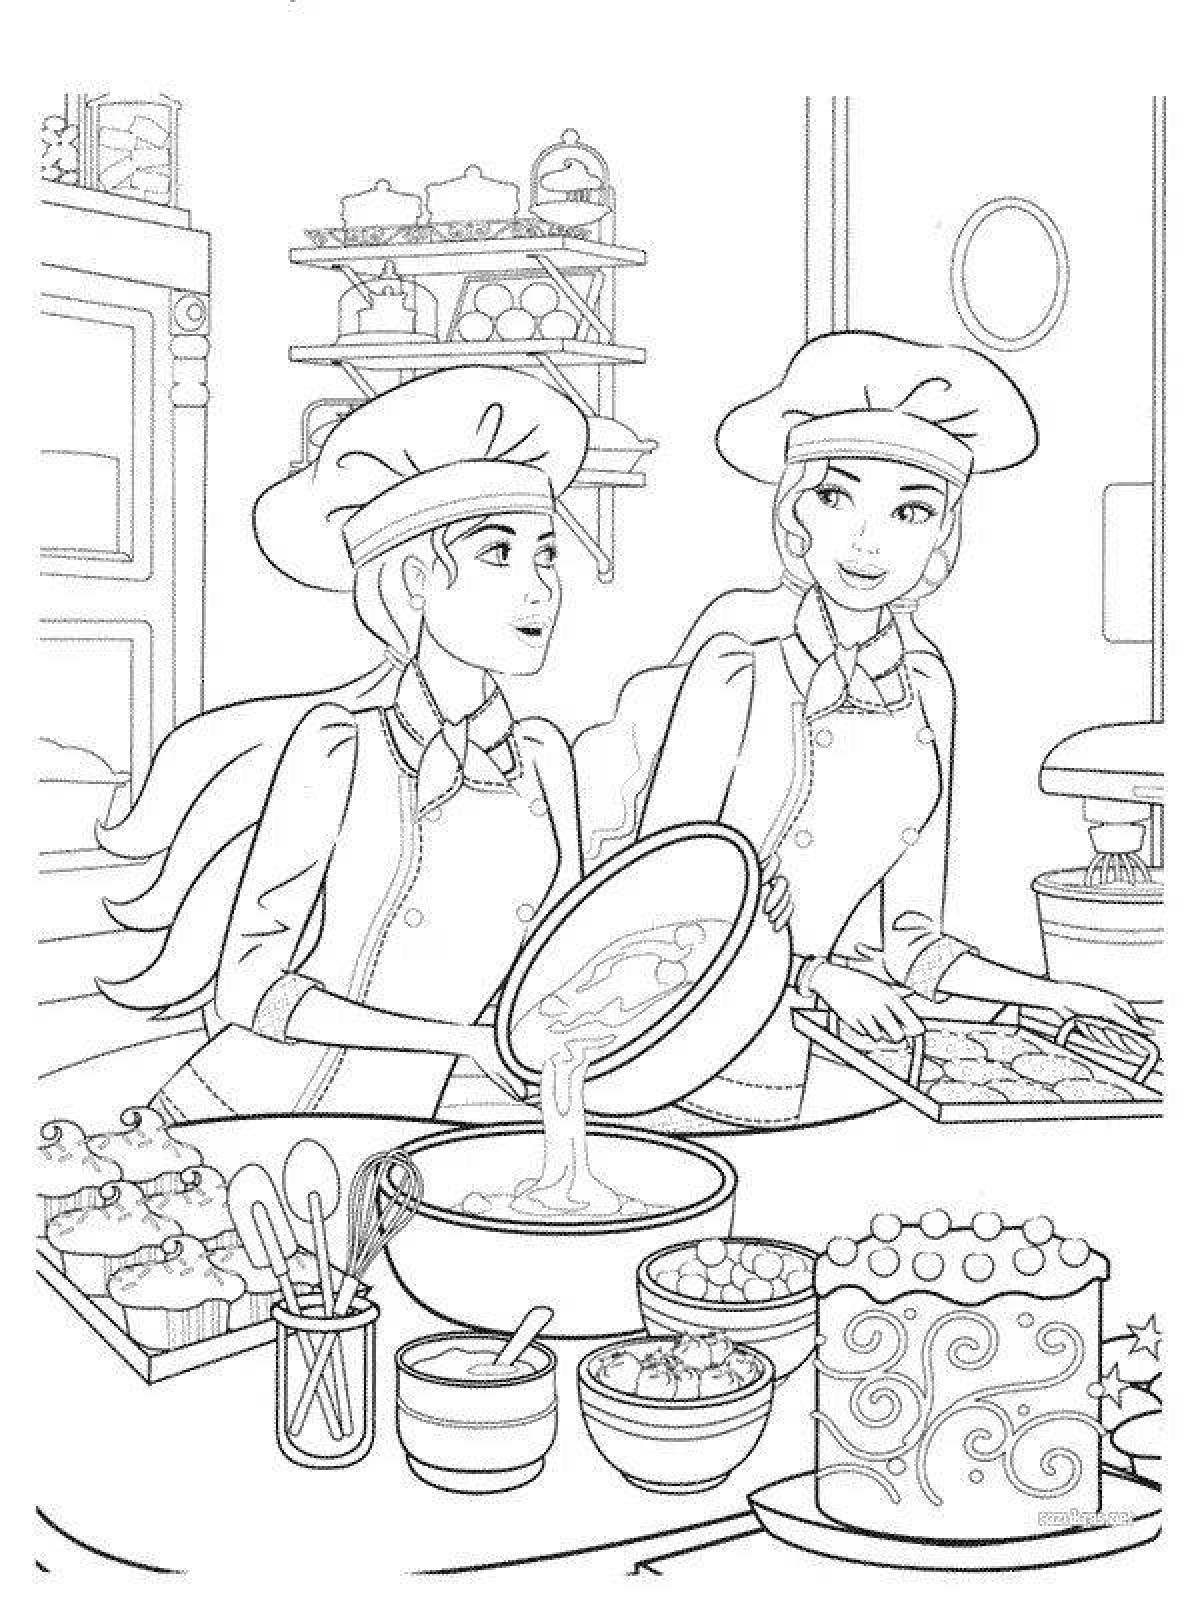 Witty confectioner coloring page for kids